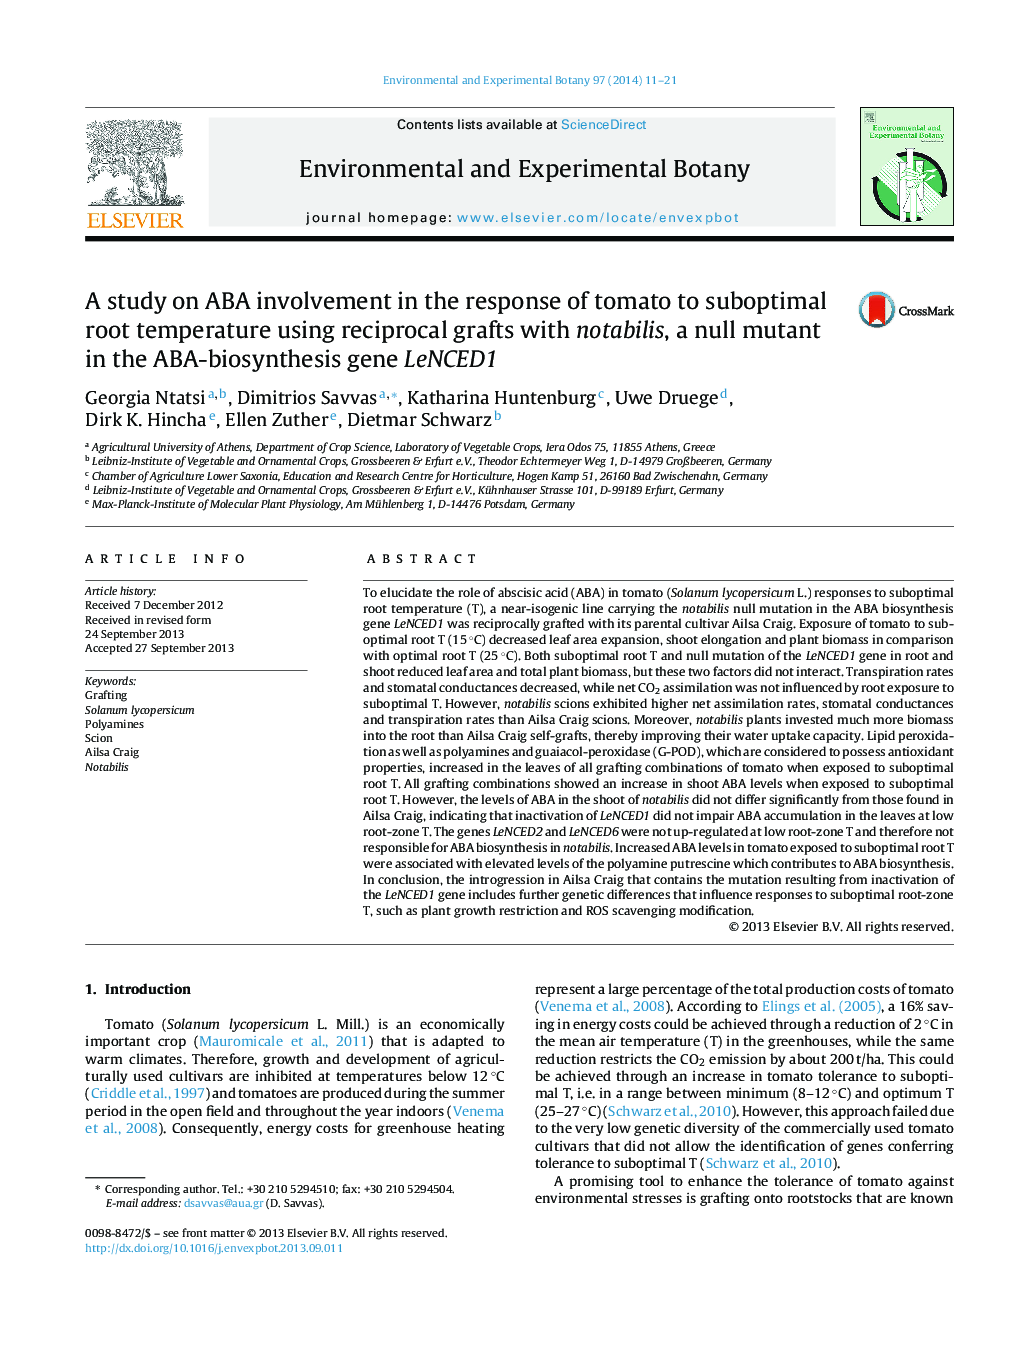 A study on ABA involvement in the response of tomato to suboptimal root temperature using reciprocal grafts with notabilis, a null mutant in the ABA-biosynthesis gene LeNCED1